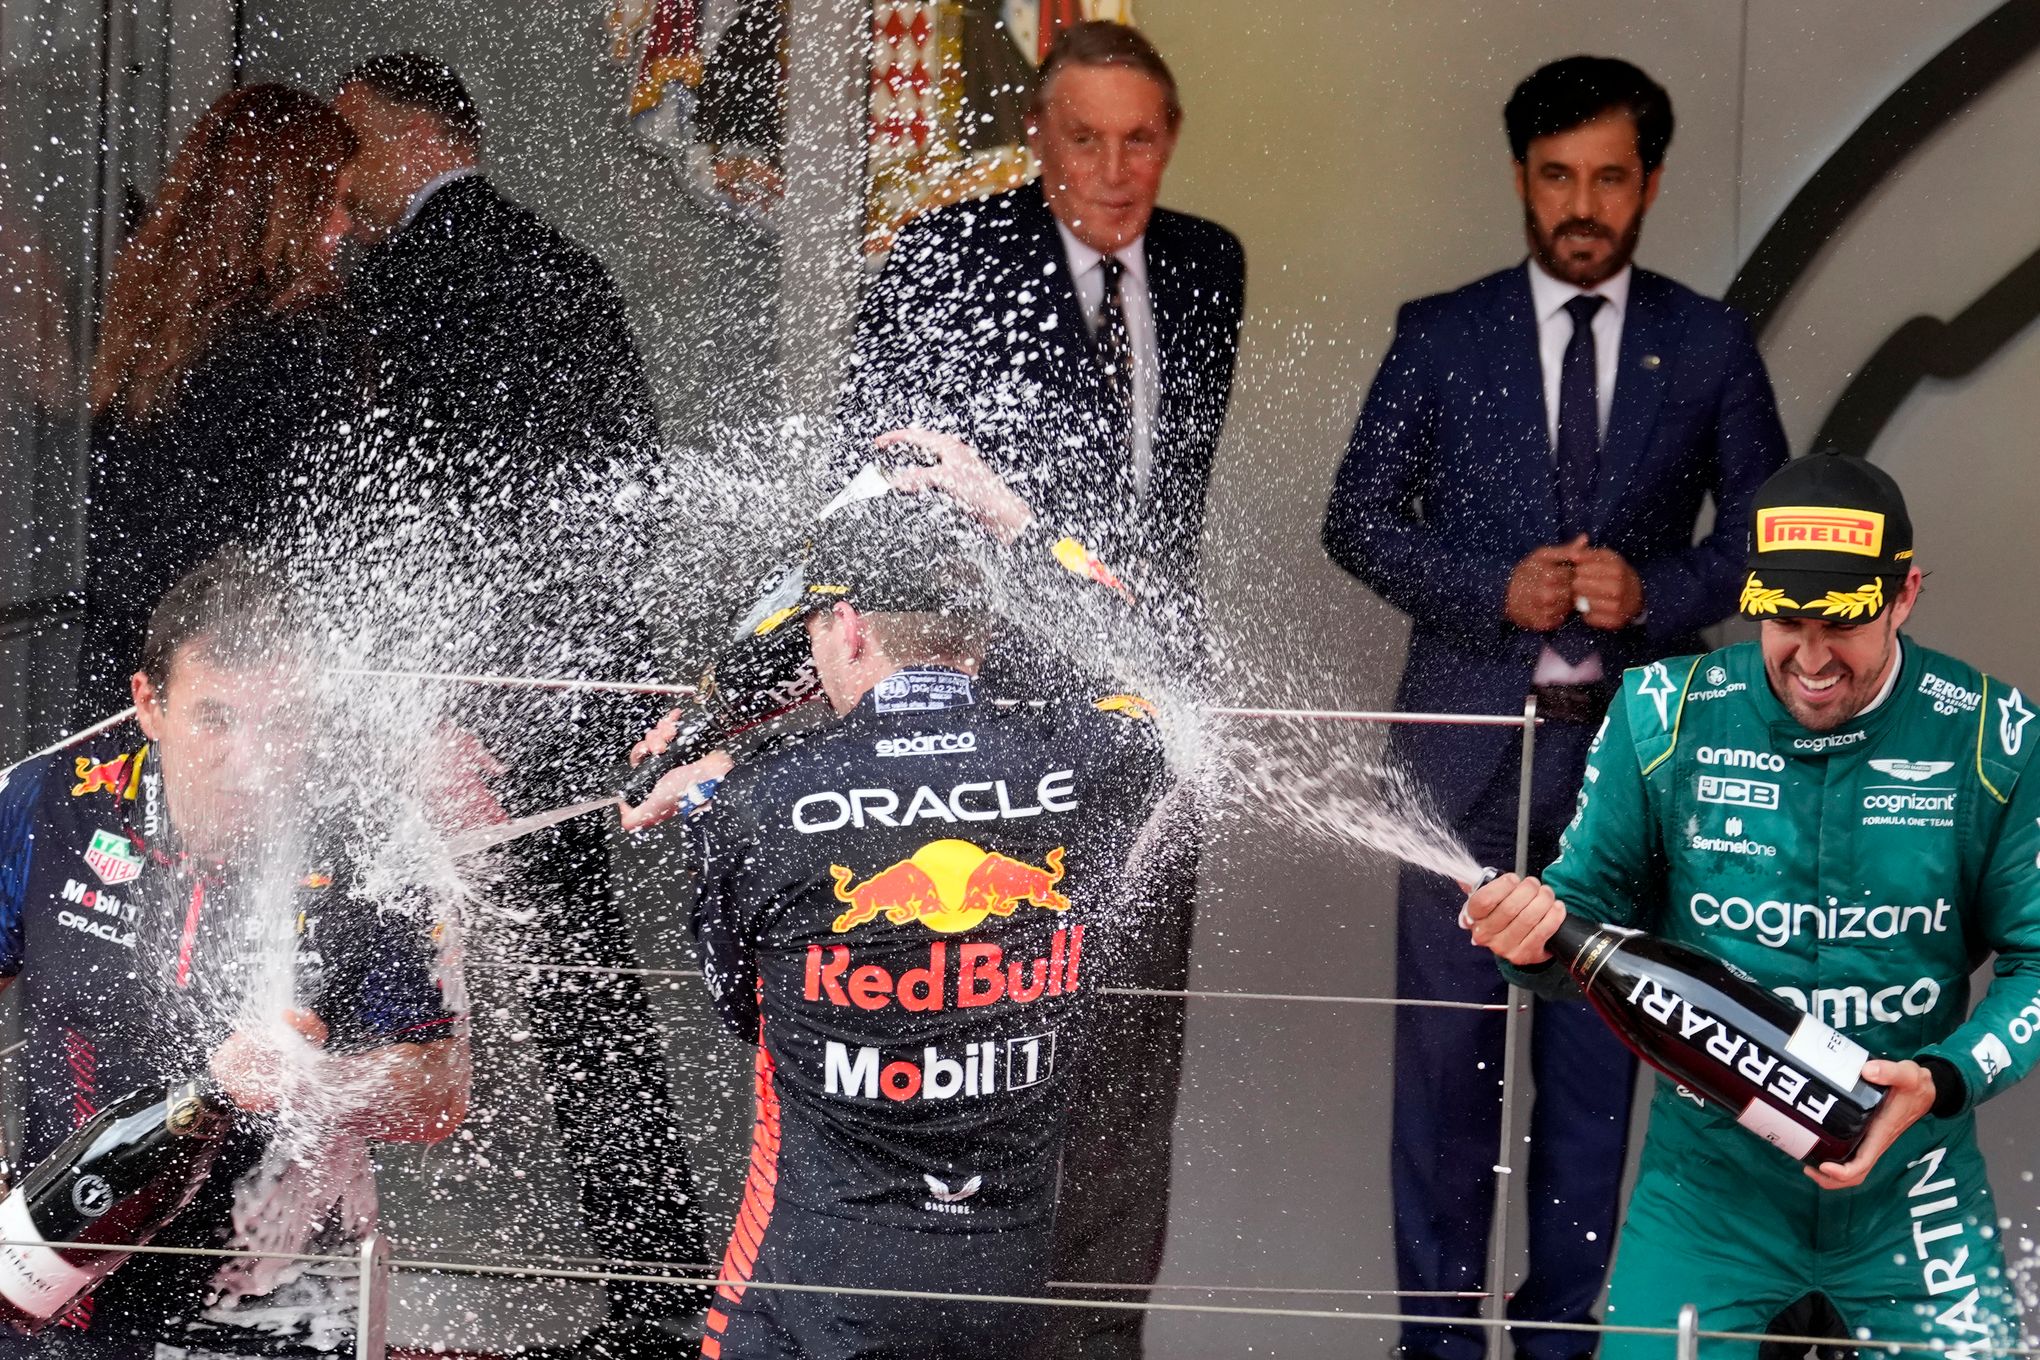 What is the classical music played on the Formula One podium